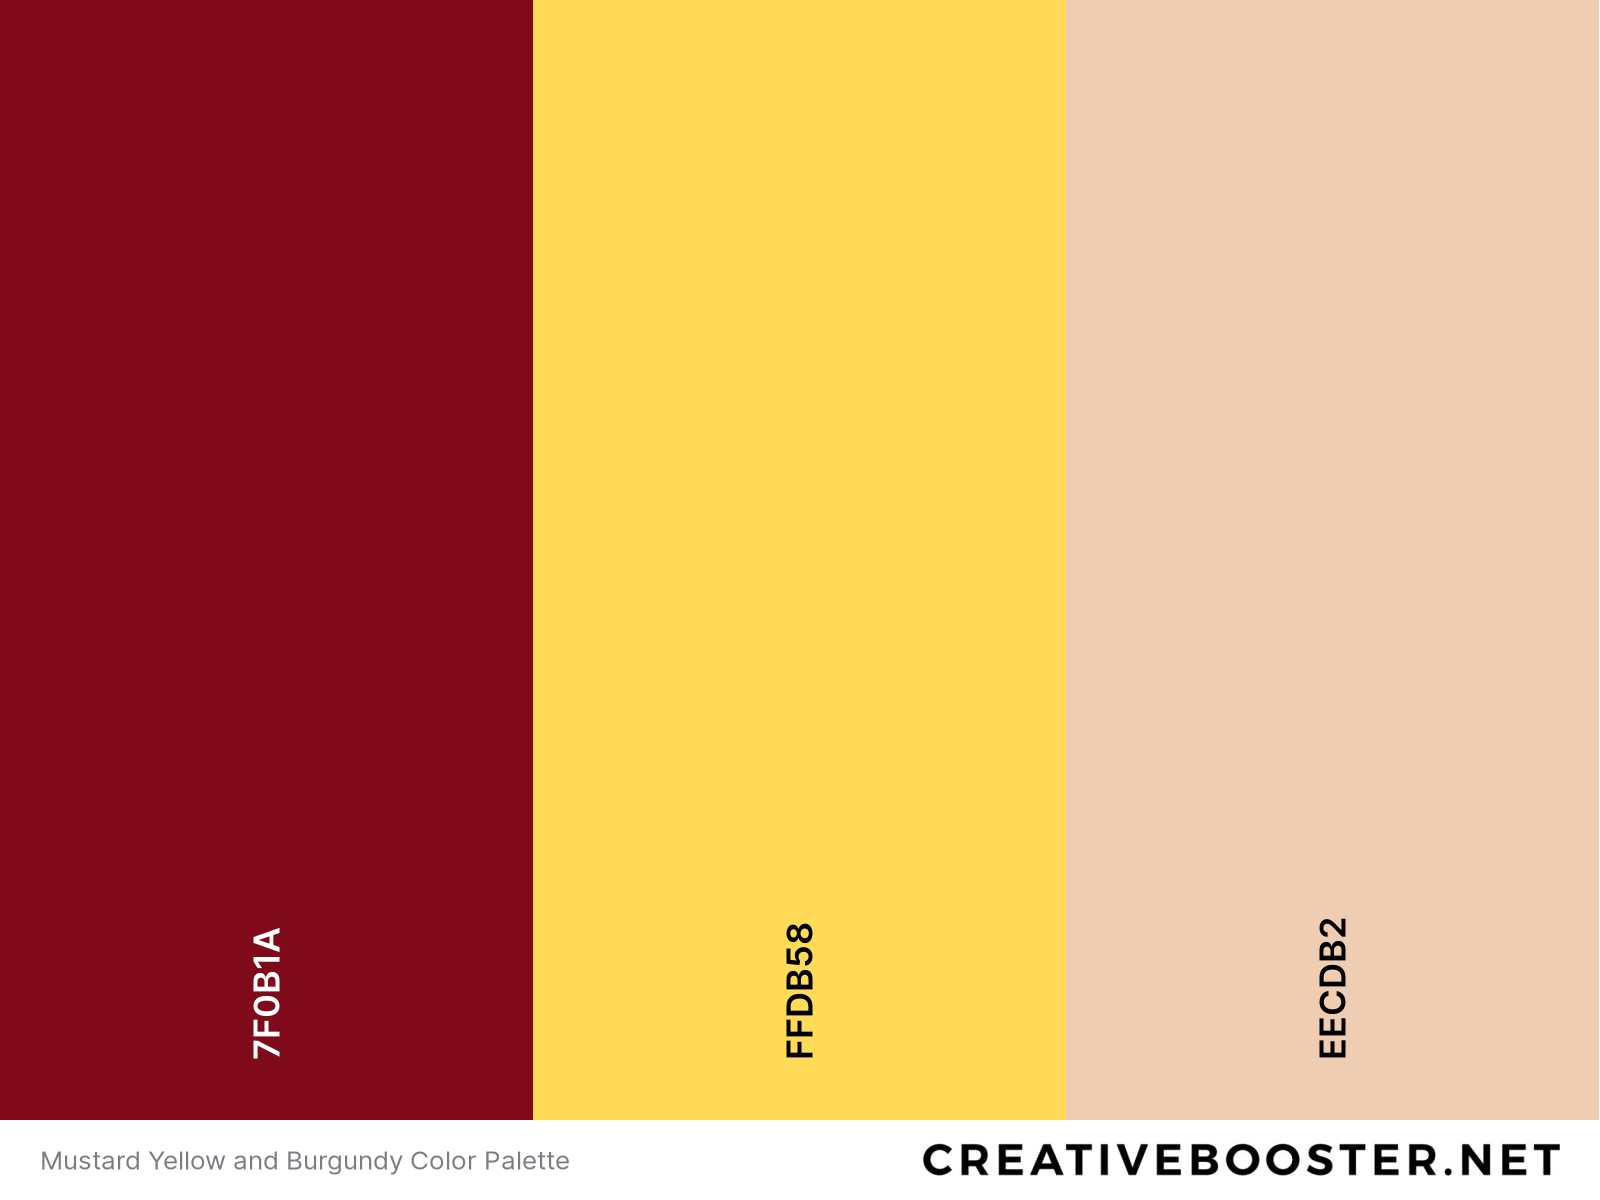 Mustard Yellow and Burgundy Color Palette